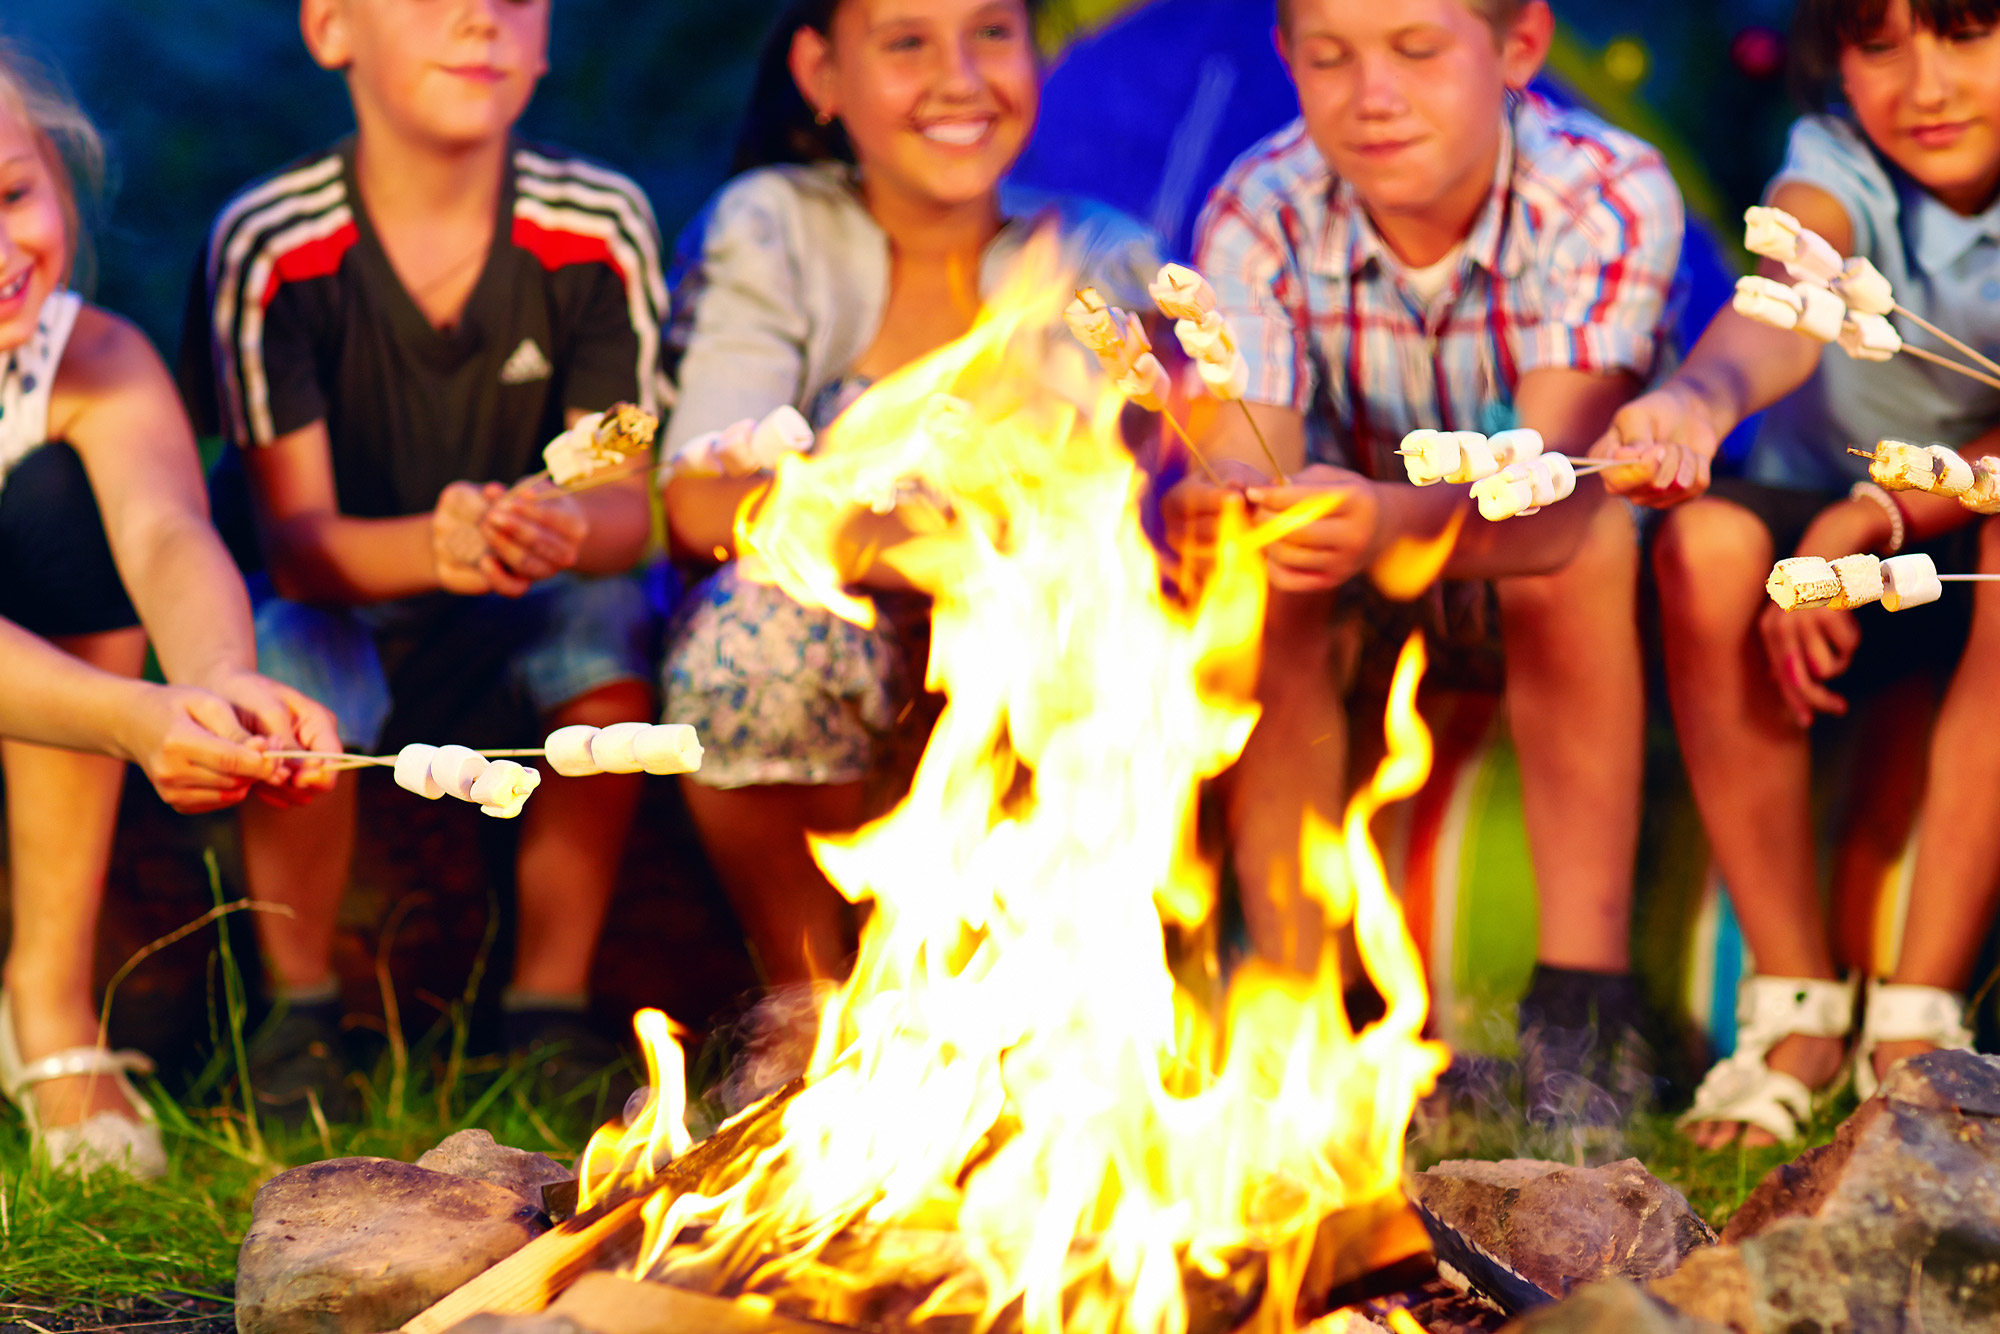 Kids roast marshmallows over a fire. This blog is about campfire desserts that go beyond just s'mores